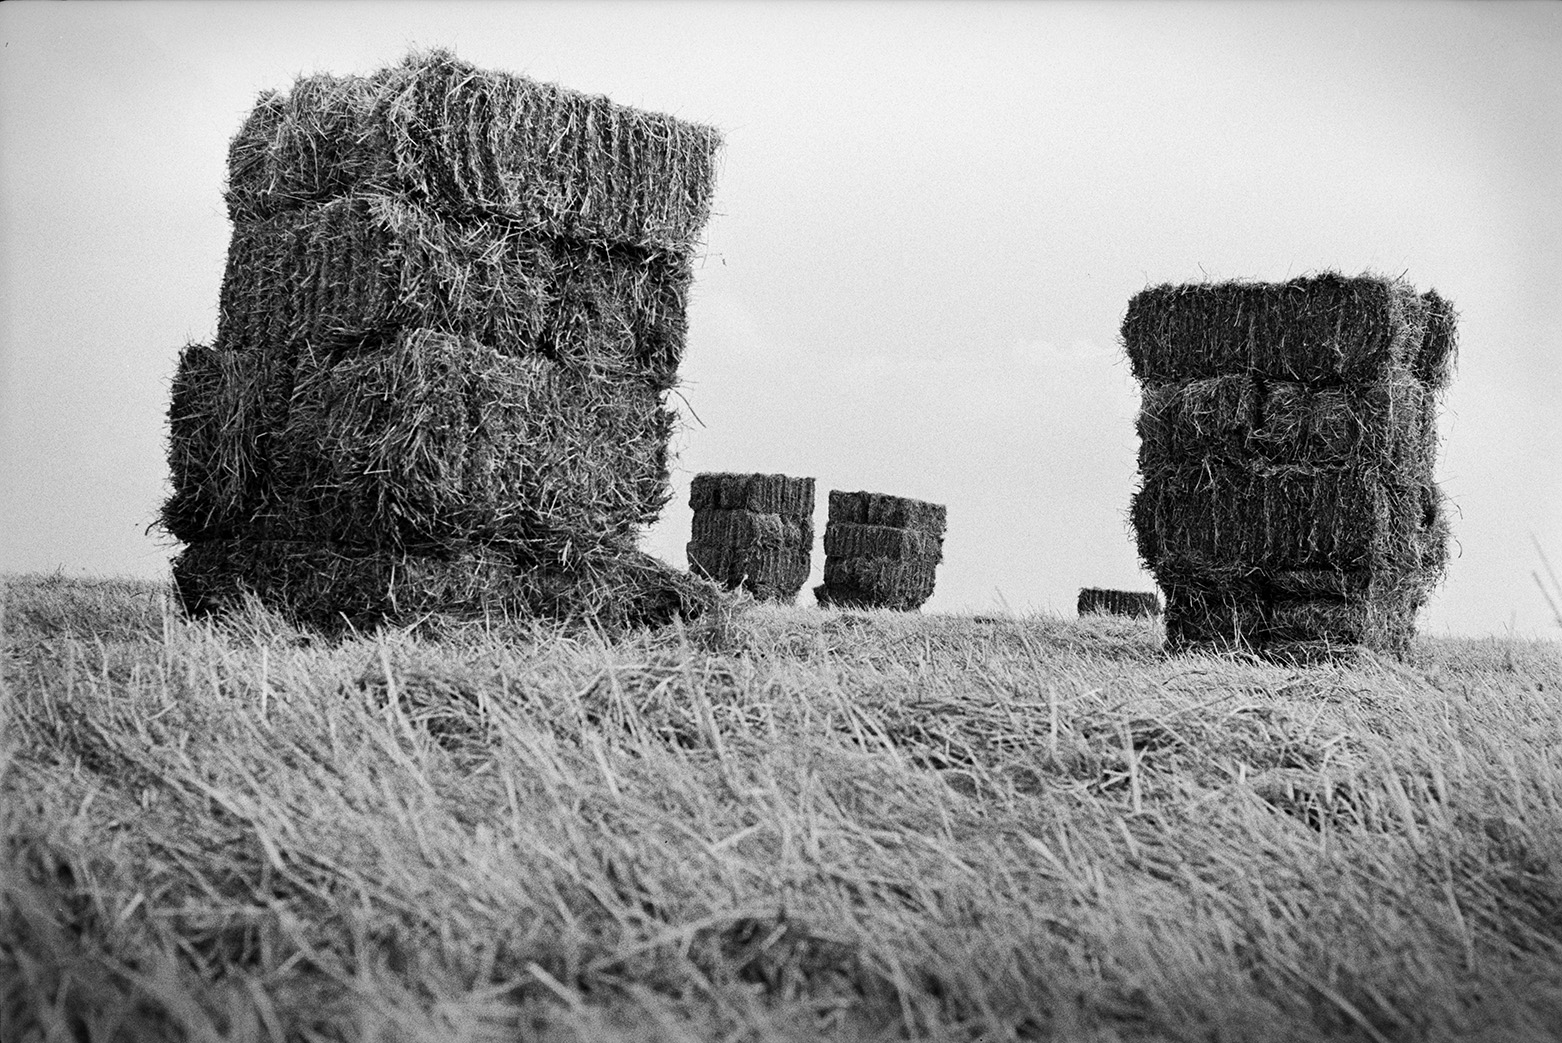 Stacks of hay bales in a field at Mill Road Farm, Beaford. The farm was also known as Jeffrys.